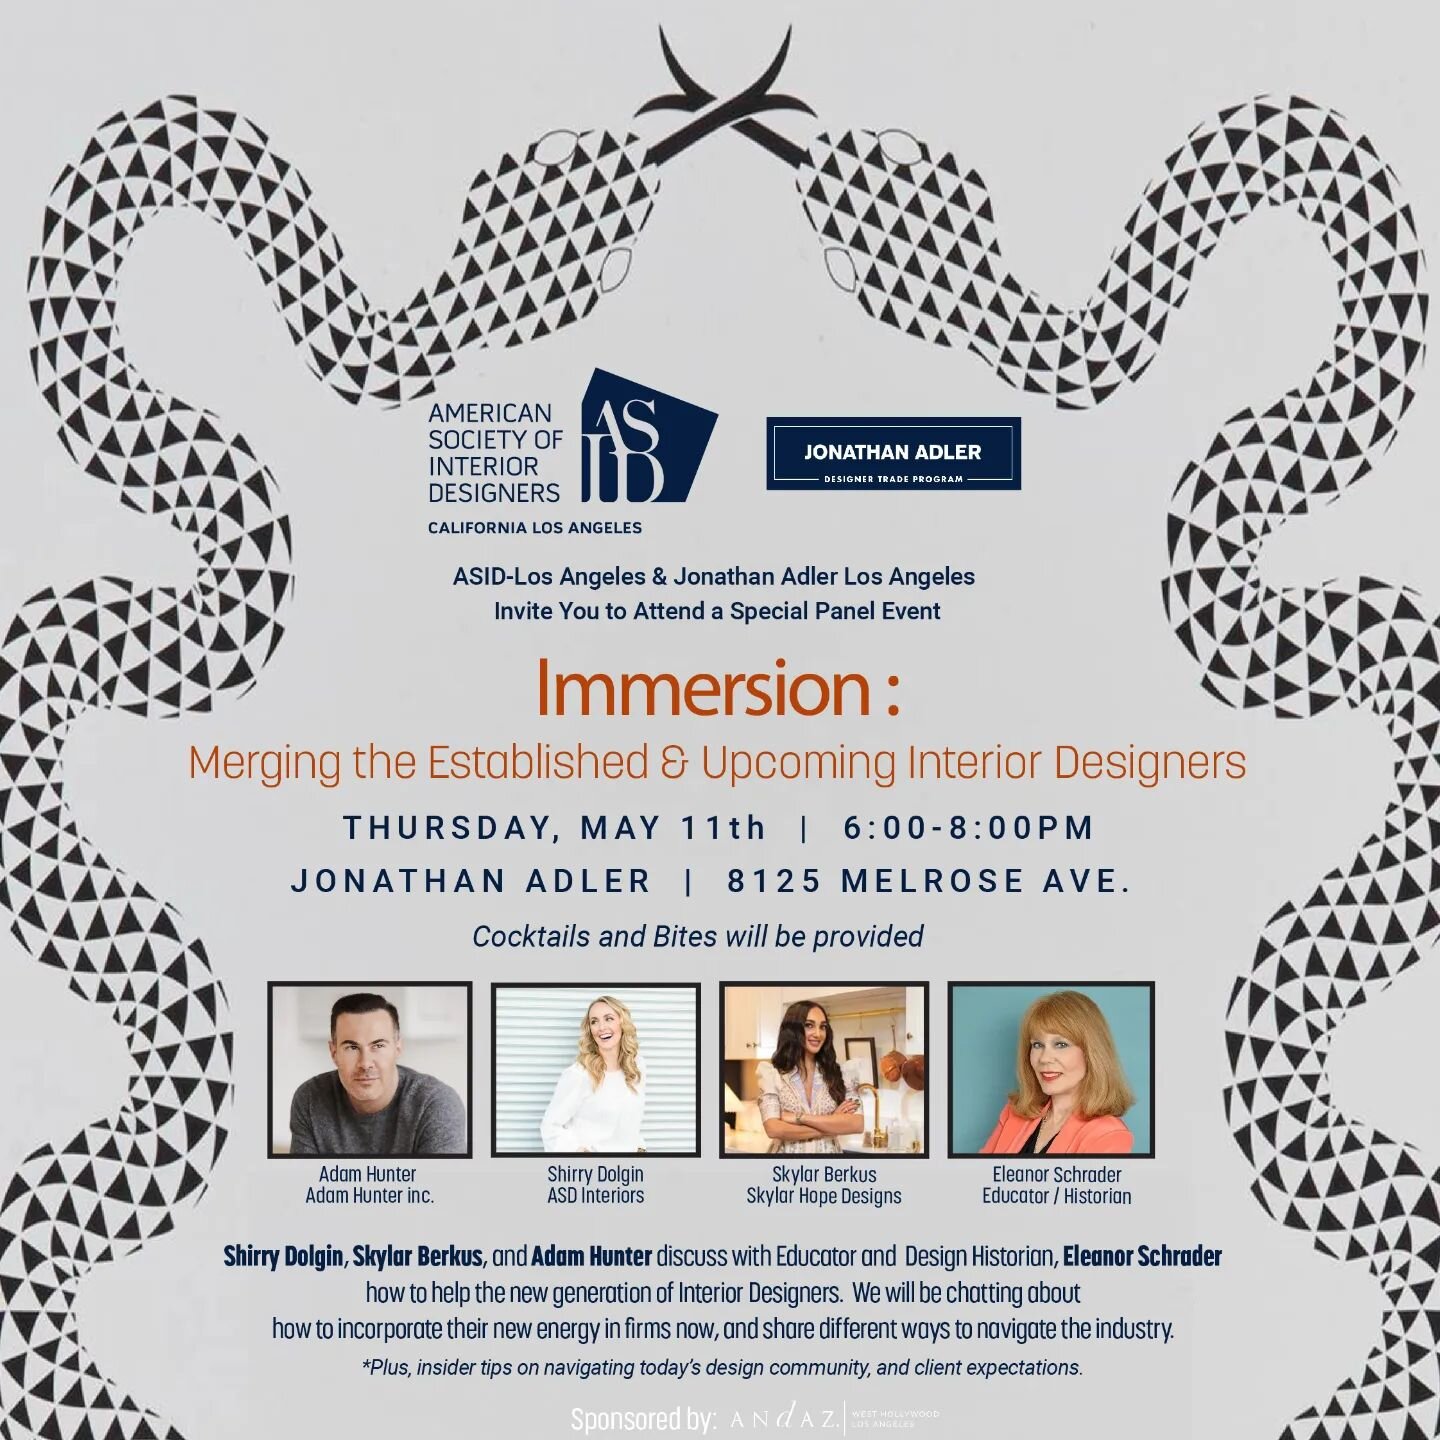 Students join us for this informative panel discussion on Thursday May 11th 6-8pm hosted by Jonathan Adler Los Angeles and @asidlosangeles!

The panelists will be discussing how to help emerging designers navigate the industry, the modern workplace, 